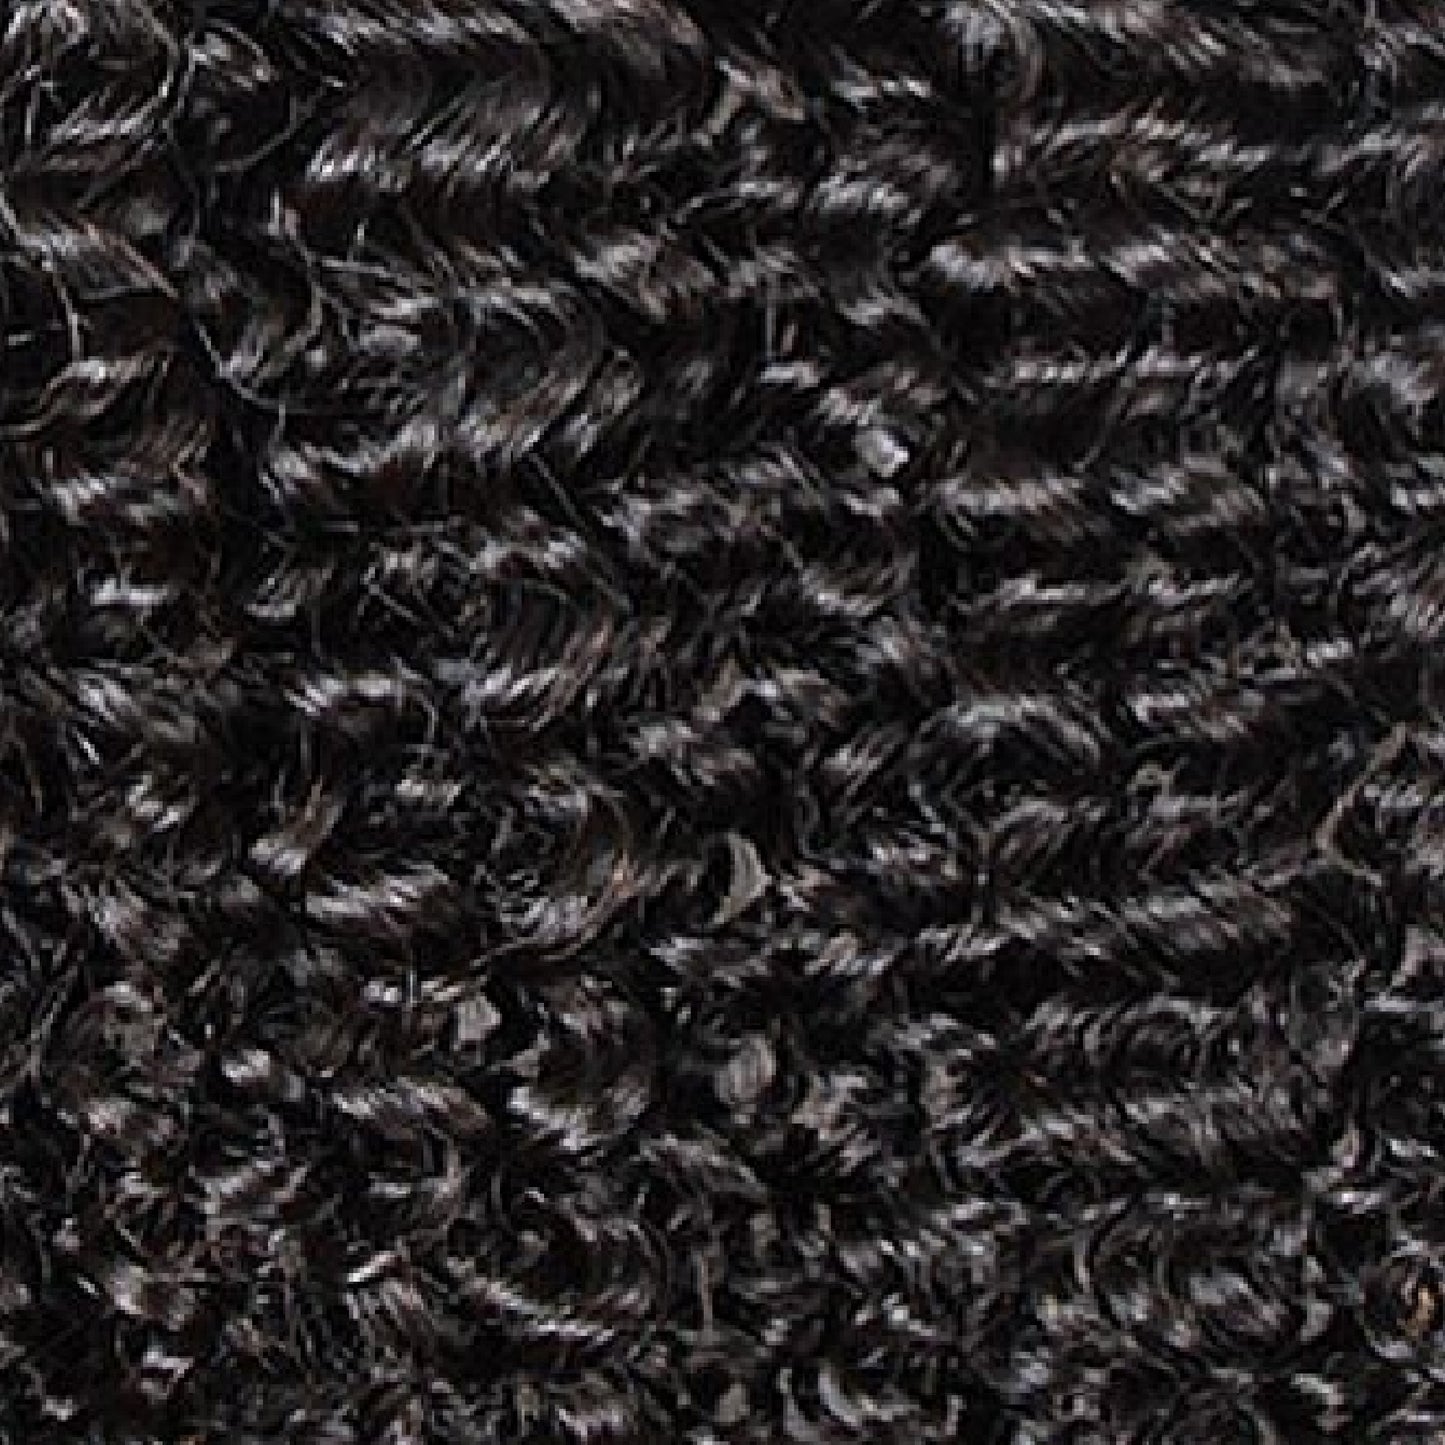 Image of Kinky curly hair texture shot